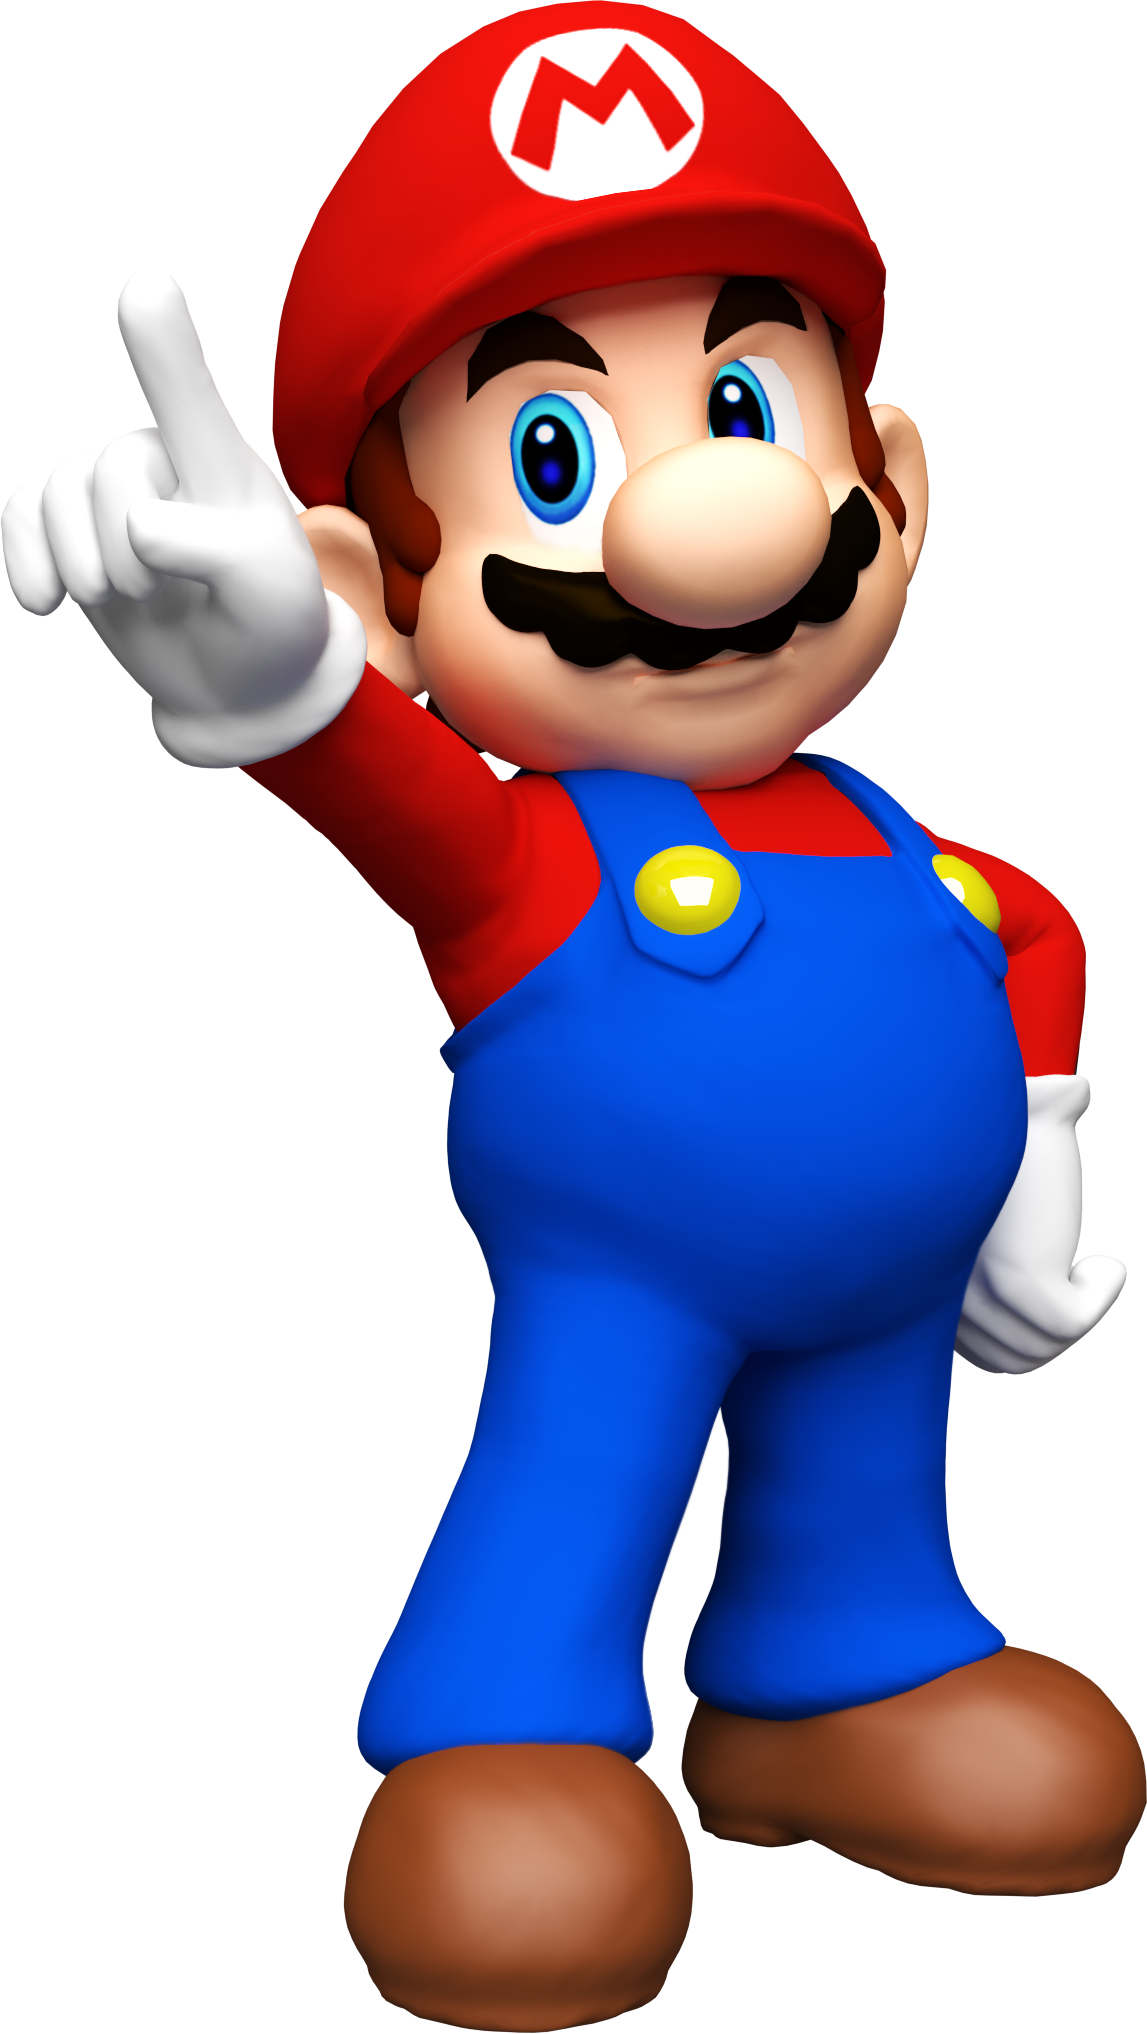 Super mario by mintenndo-d62lh70.png, Super Mario PNG - Free PNG